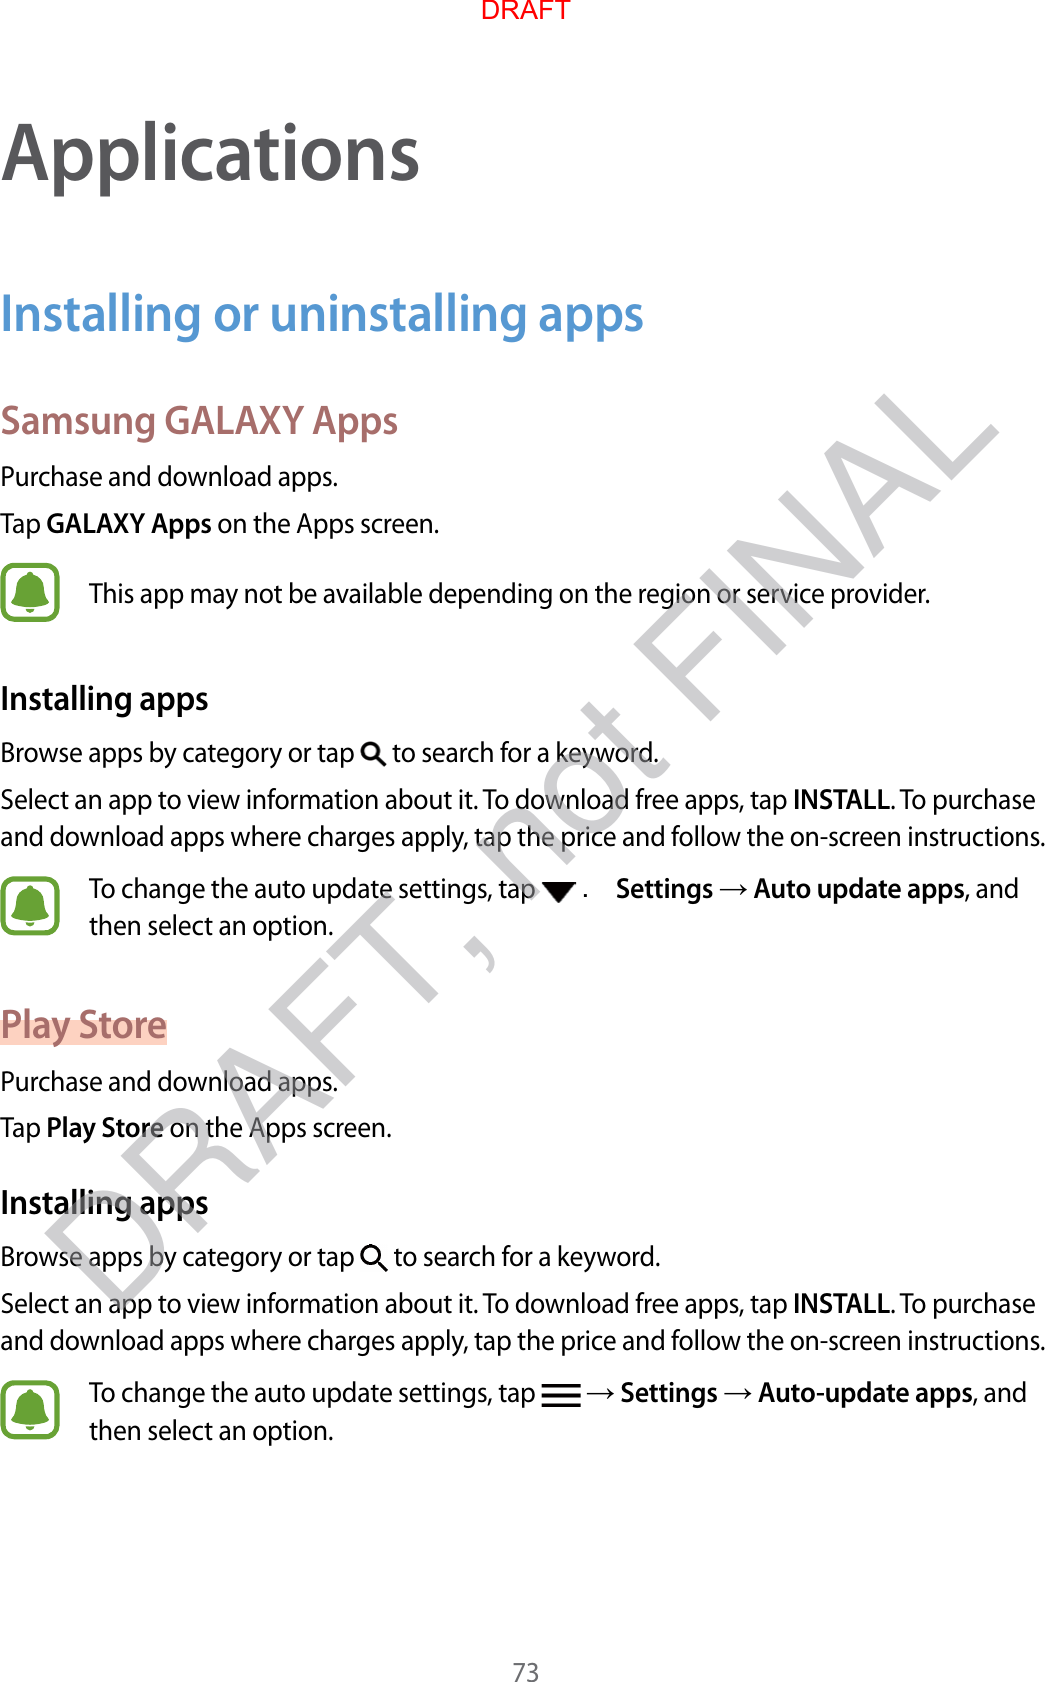 73ApplicationsInstalling or uninstalling appsSamsung GALAXY AppsPurchase and download apps.Tap GALAXY Apps on the Apps screen.This app may not be available depending on the region or service provider.Installing appsBrowse apps by category or tap   to search for a keyword.Select an app to view information about it. To download free apps, tap INSTALL. To purchase and download apps where charges apply, tap the price and follow the on-screen instructions.To change the auto update settings, tap   . Settings  Auto update apps, and then select an option.Play StorePurchase and download apps.Tap Play Store on the Apps screen.Installing appsBrowse apps by category or tap   to search for a keyword.Select an app to view information about it. To download free apps, tap INSTALL. To purchase and download apps where charges apply, tap the price and follow the on-screen instructions.To change the auto update settings, tap    Settings  Auto-update apps, and then select an option.DRAFTDRAFT, not FINAL